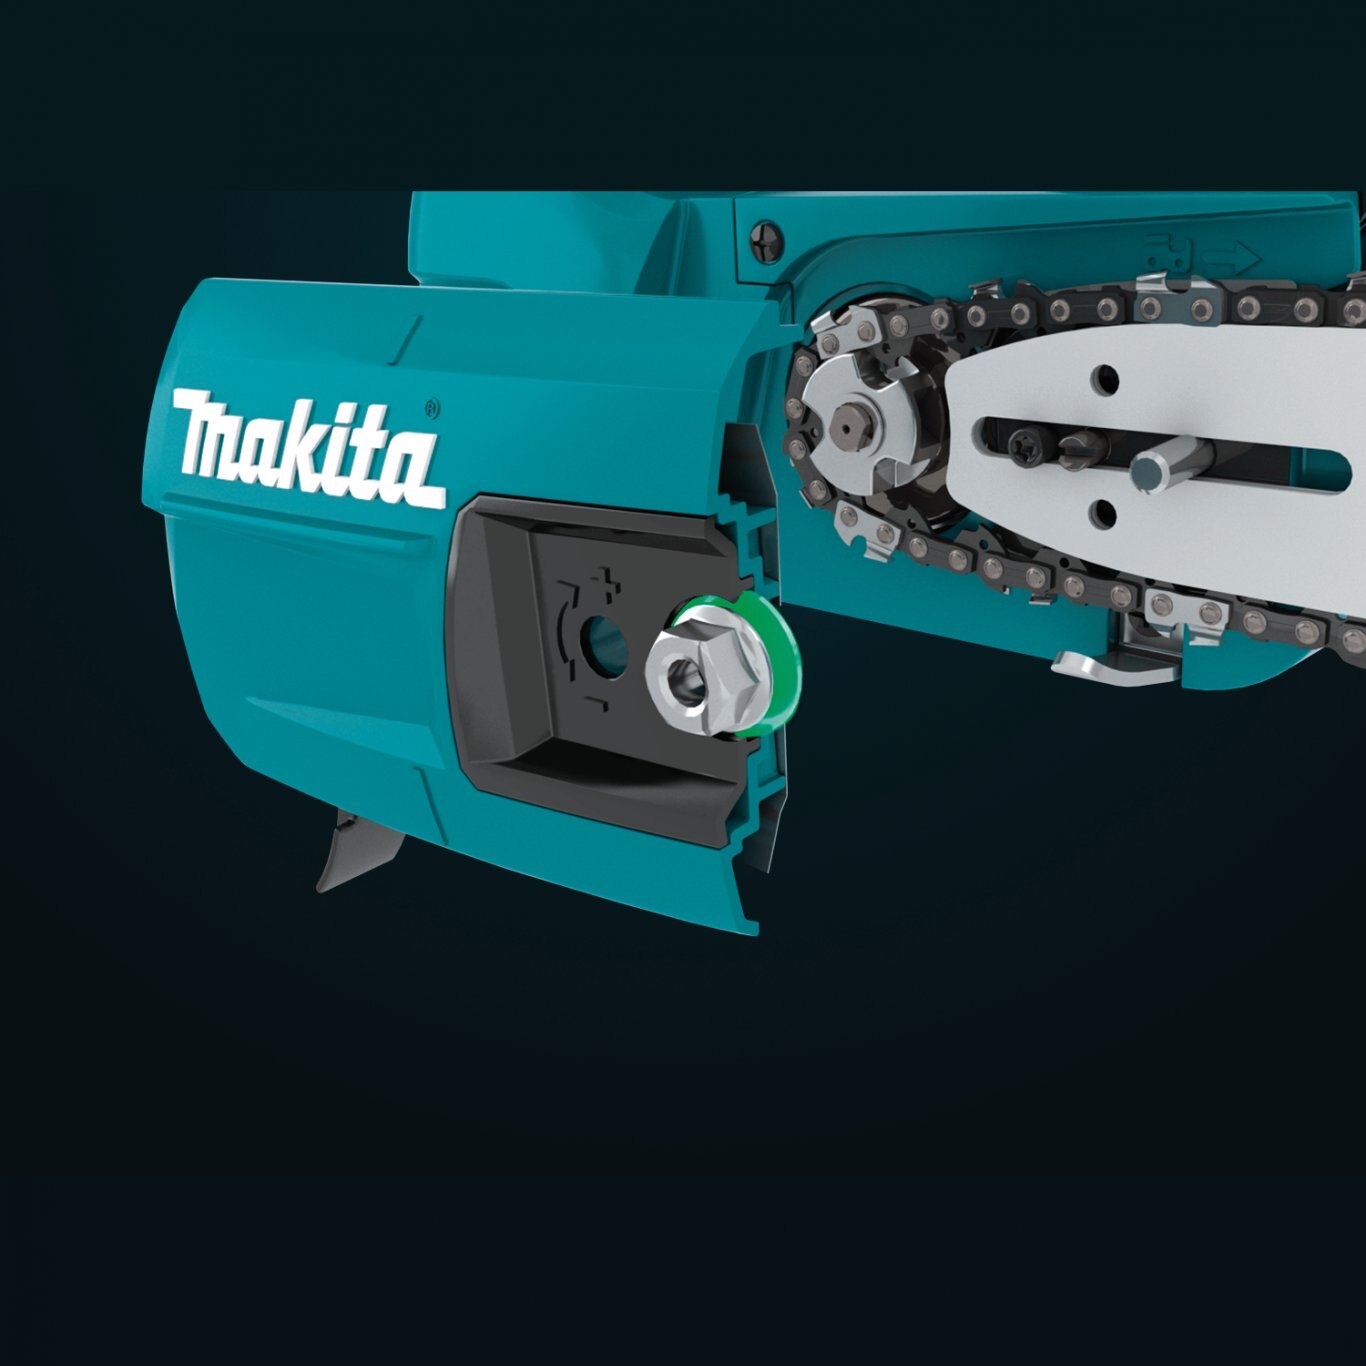 Makita 18V LXT® Lithium?Ion Brushless Cordless 10 Top Handle Chain Saw, Tool Only